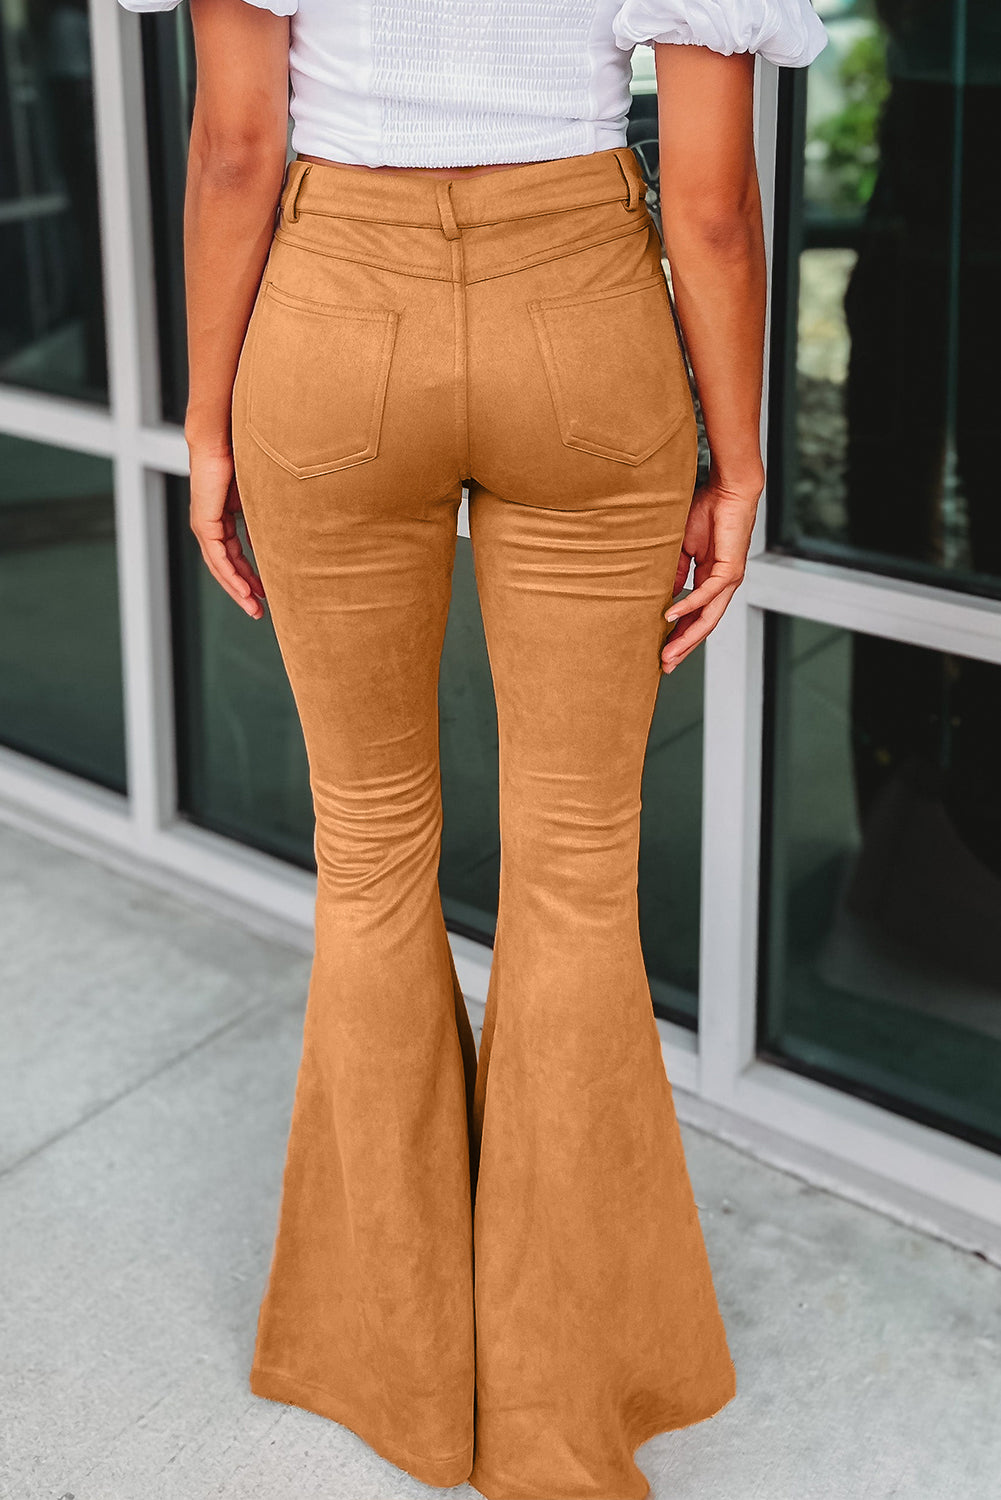 Brown Exposed Seam Flare Suede Womens Pants with Pockets - US2EInc Apparel Plug Ltd. Co